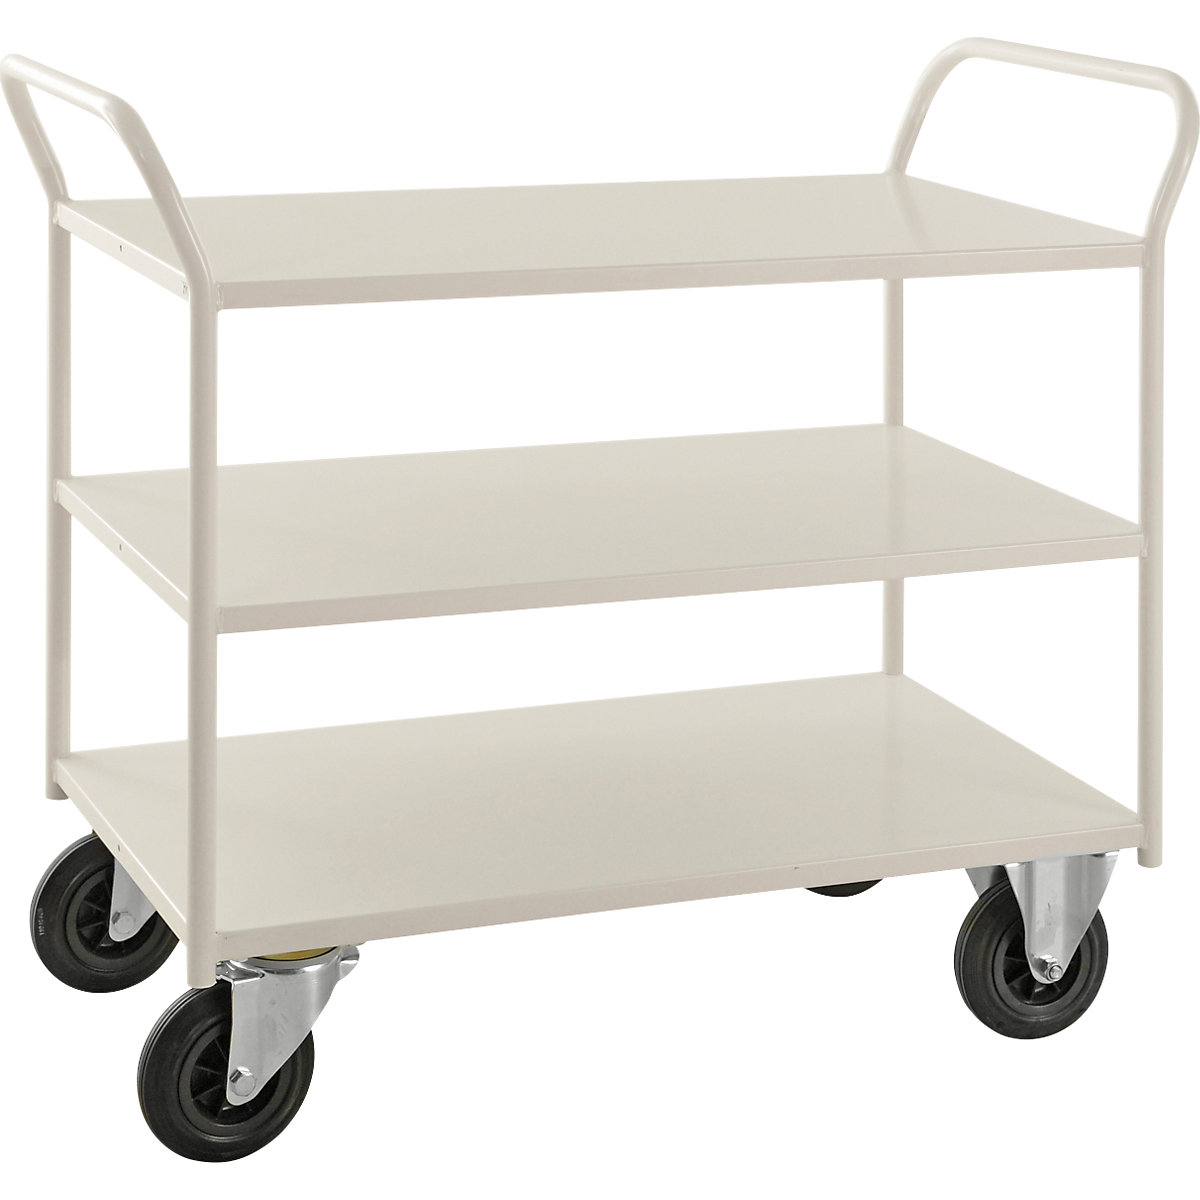 KM41 table trolley – Kongamek, 3 shelves with raised edges, LxWxH 1080 x 450 x 1000 mm, white, 2 swivel castors and 2 fixed castors, 5+ items-5